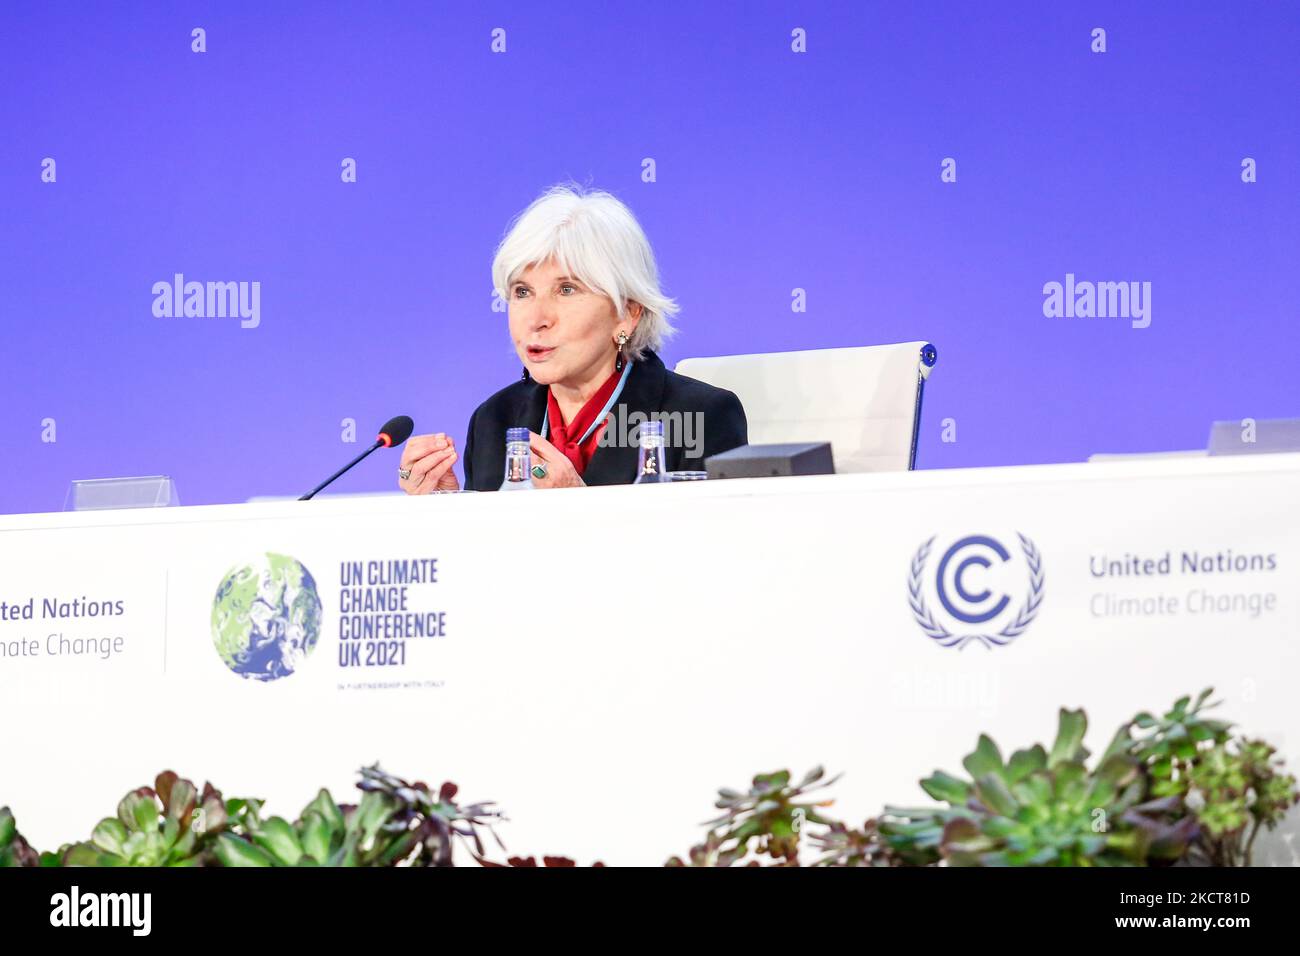 Laurence Tubiana, CEO of the European Climate Foundation speaks during Energy Transition Council session during the during the fifth day of the COP26 UN Climate Change Conference, held by UNFCCC inside the COP26 venue - Scottish Event Campus in Glasgow, Scotland on November 4, 2021. COP26, running from October 31 to November 12 in Glasgow, will be the most significant climate conference since the 2015 Paris summit as the nations are expected to set new greenhouse gas emission targets in order to slow the global warming, as well as firming up other key commitments. (Photo by Dominika Zarzycka/N Stock Photo